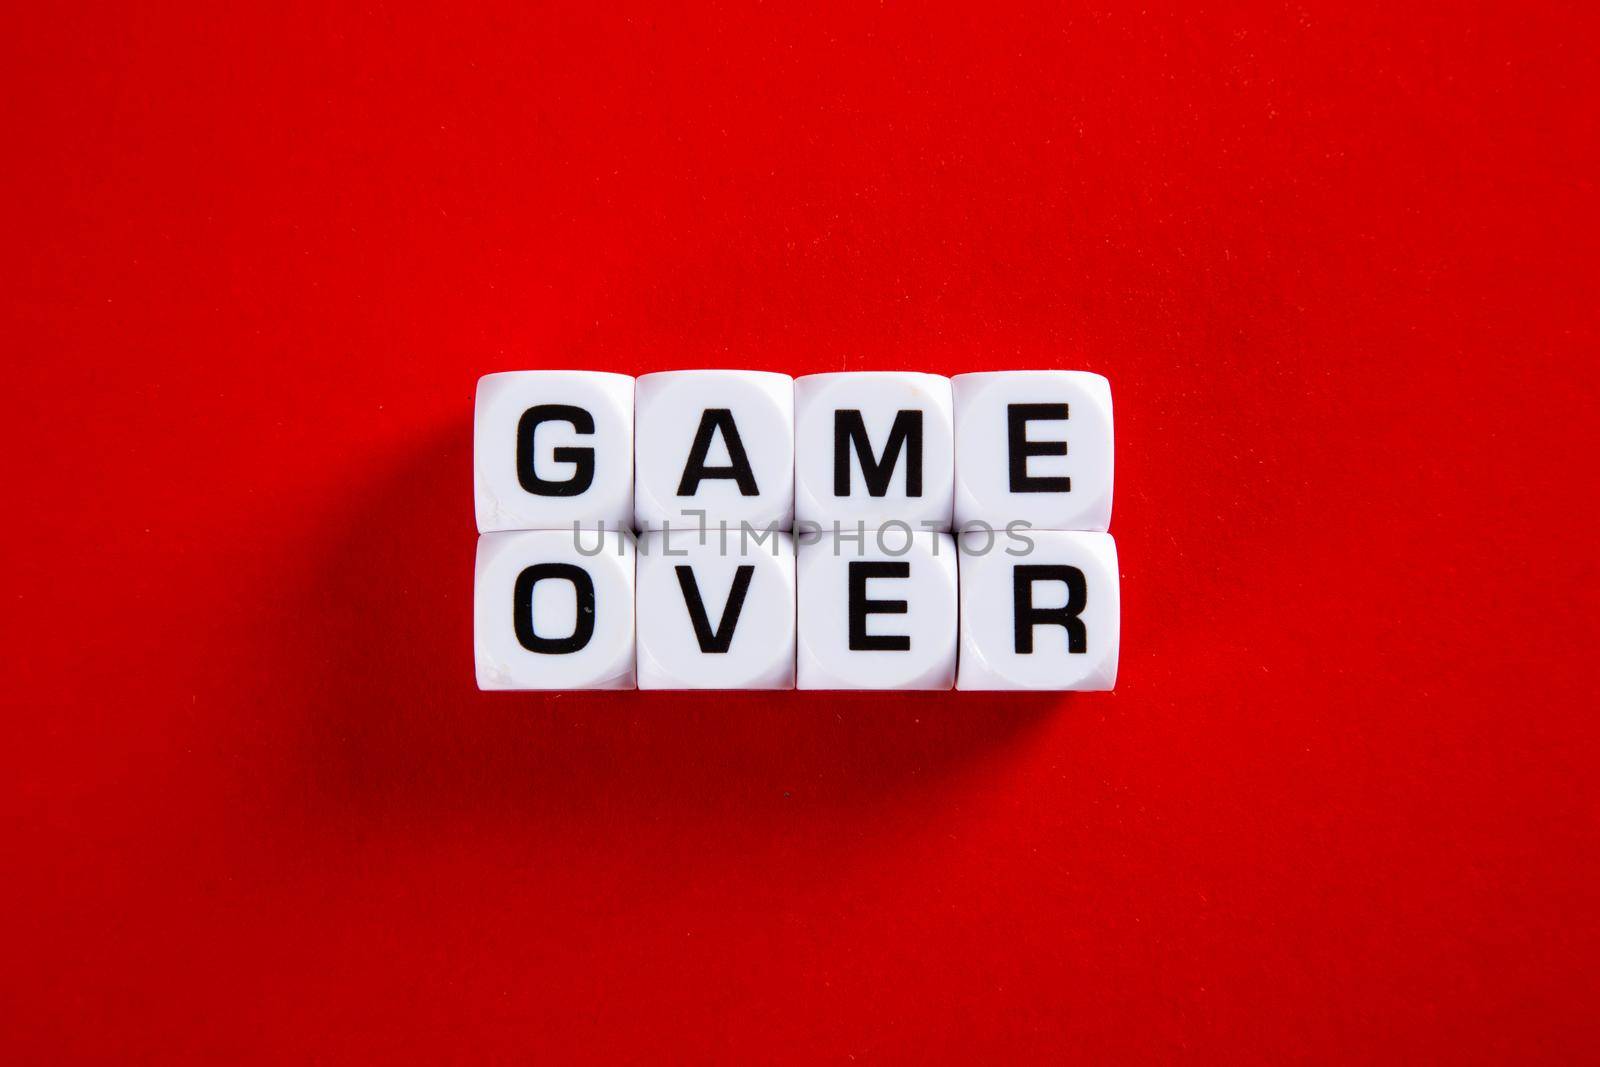 A game over wording on red background by tehcheesiong